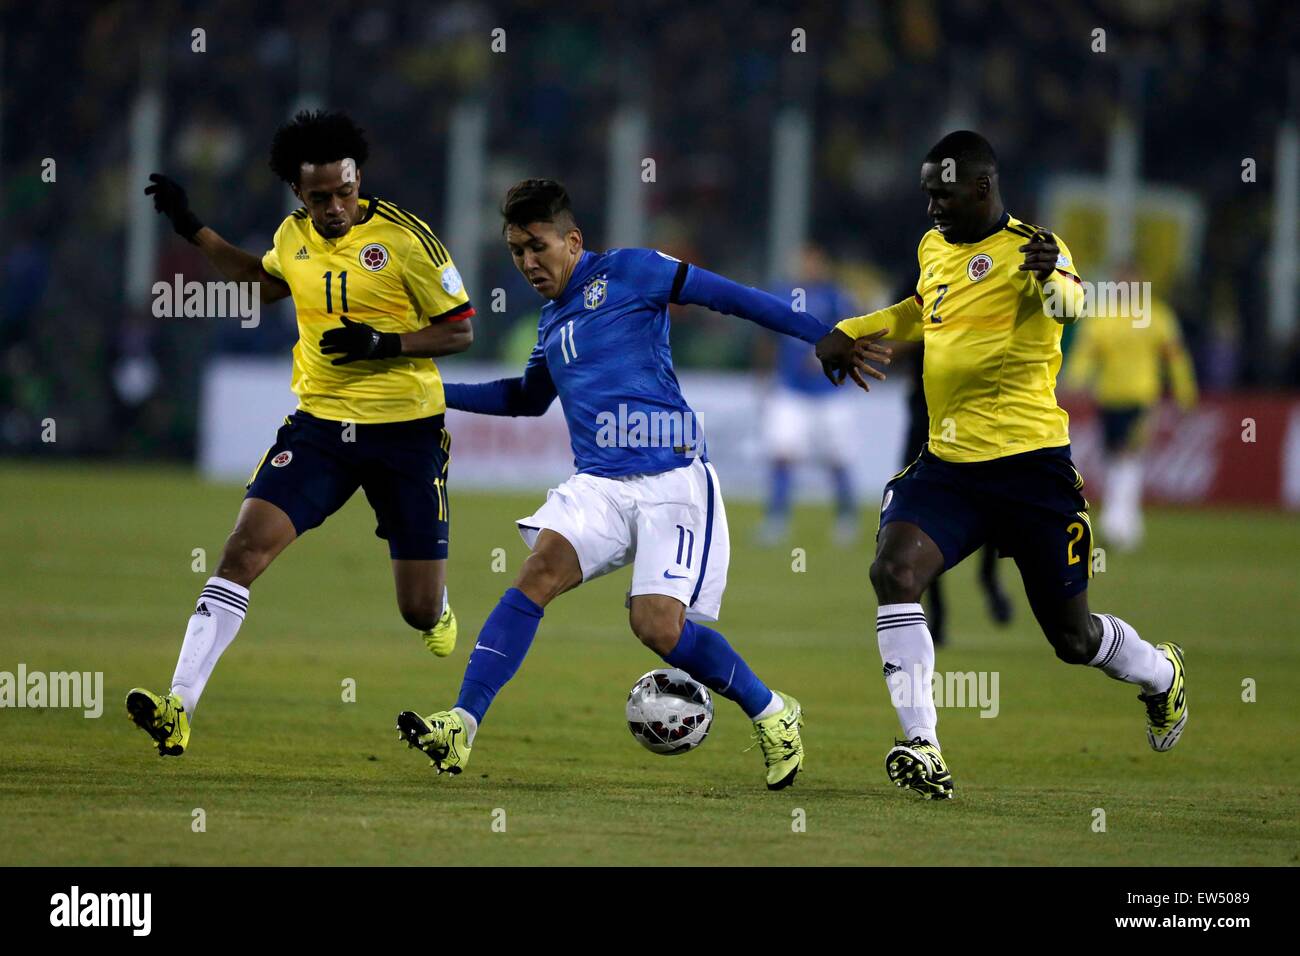 Santiago, Chile. 17th June, 2015. Roberto Firmino (C) of Brazil vies for the ball with Juan Cuadrado (L) and Cristian Zapata of Colombia during the Group C match of the Copa America Chile 2015 between Brazil and Colombia, at the Estadio Monumental, in Santiago, Chile, on June 17, 2015. Credit:  Guillermo Arias/Xinhua/Alamy Live News Stock Photo